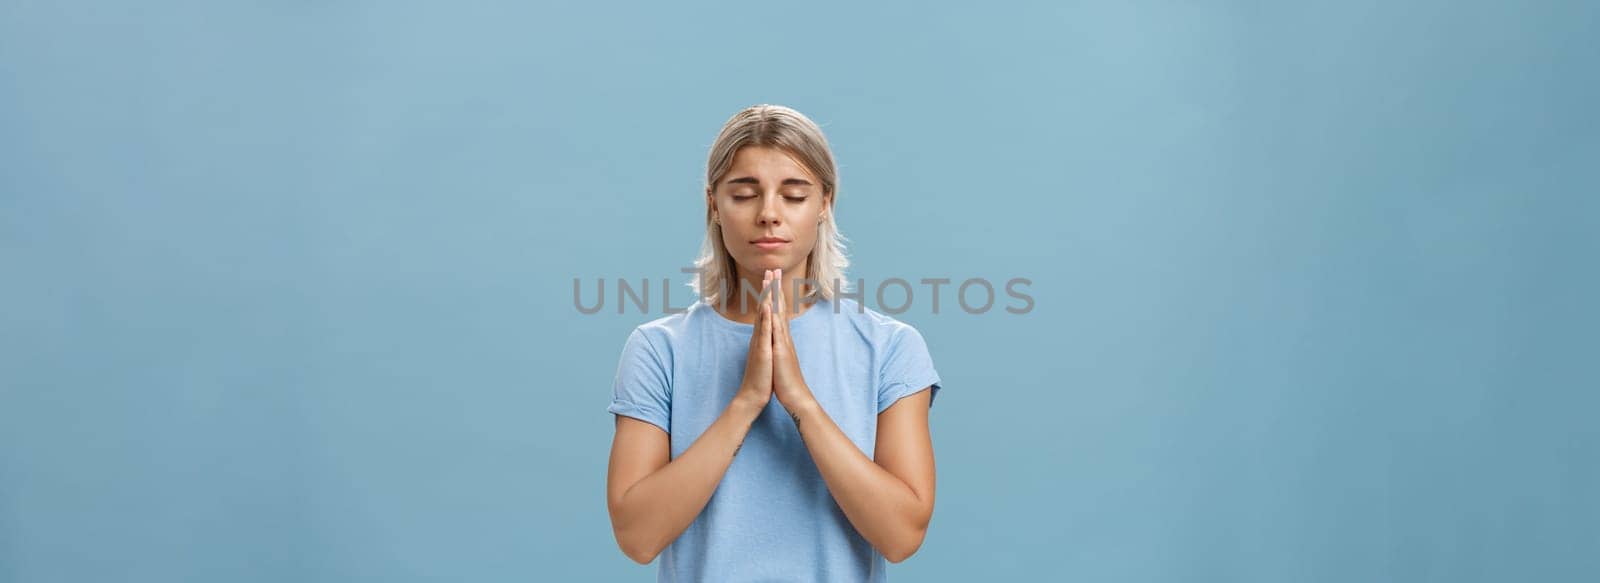 Good-looking kind and faithful european girl with blond hair smiling cute and tender holding hands in pray while making wish hopefully believing god hearing her prayers with closed eyes over blue wall by Benzoix